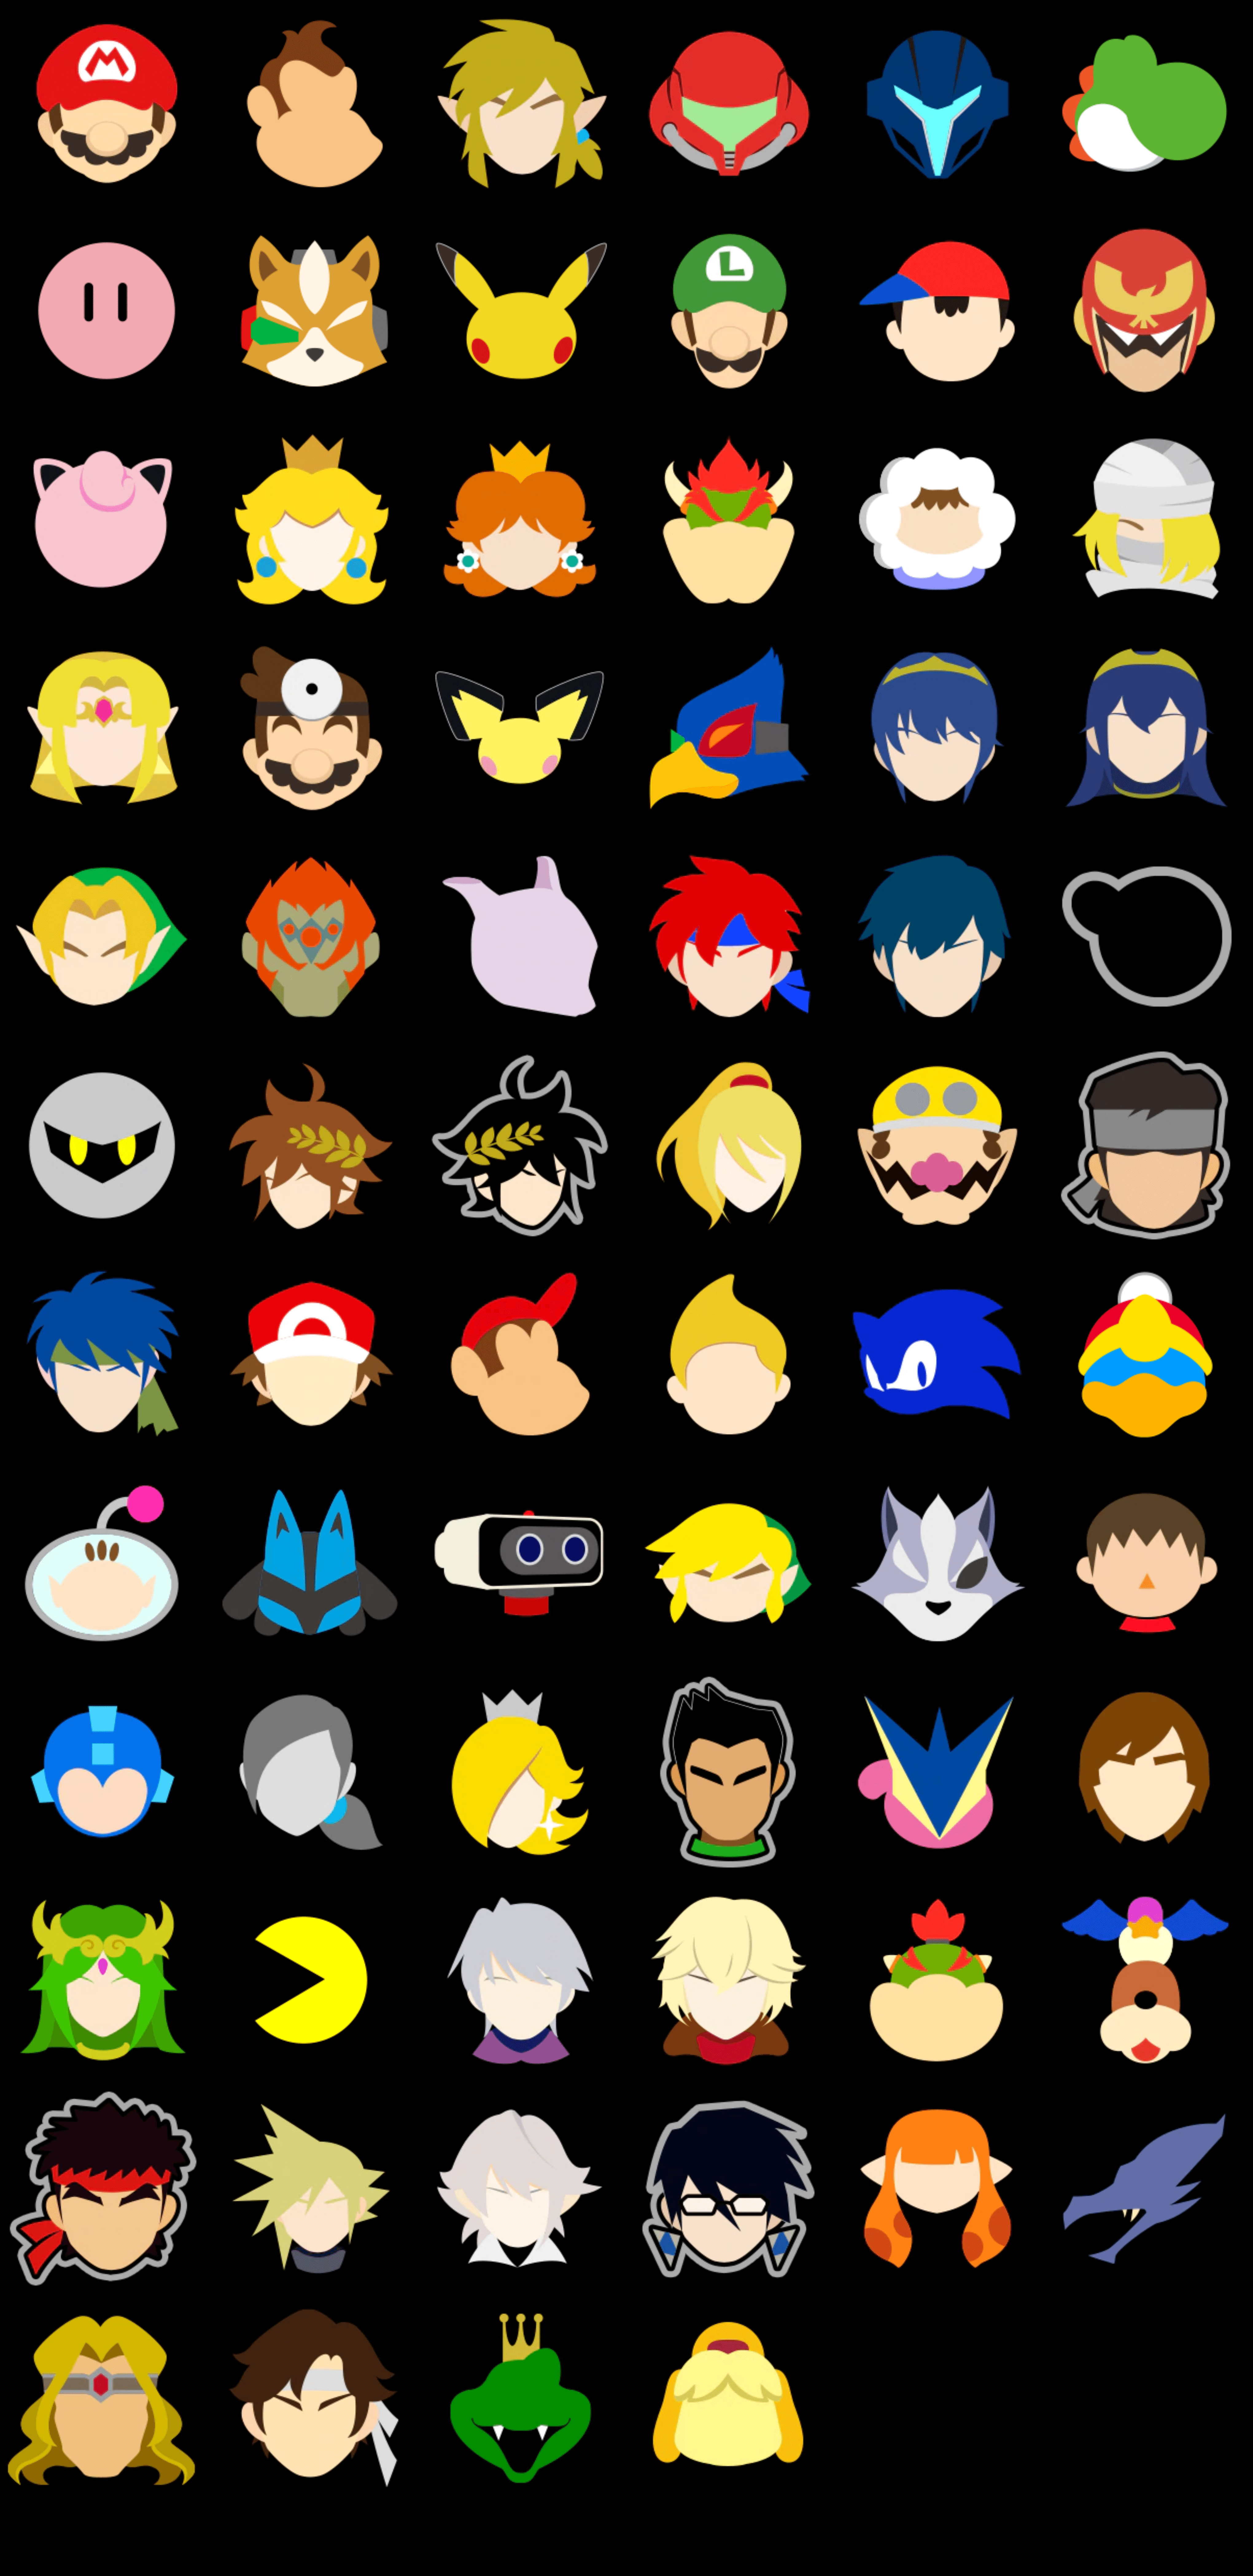 Up to date Smash phone wallpaper with all stock icons